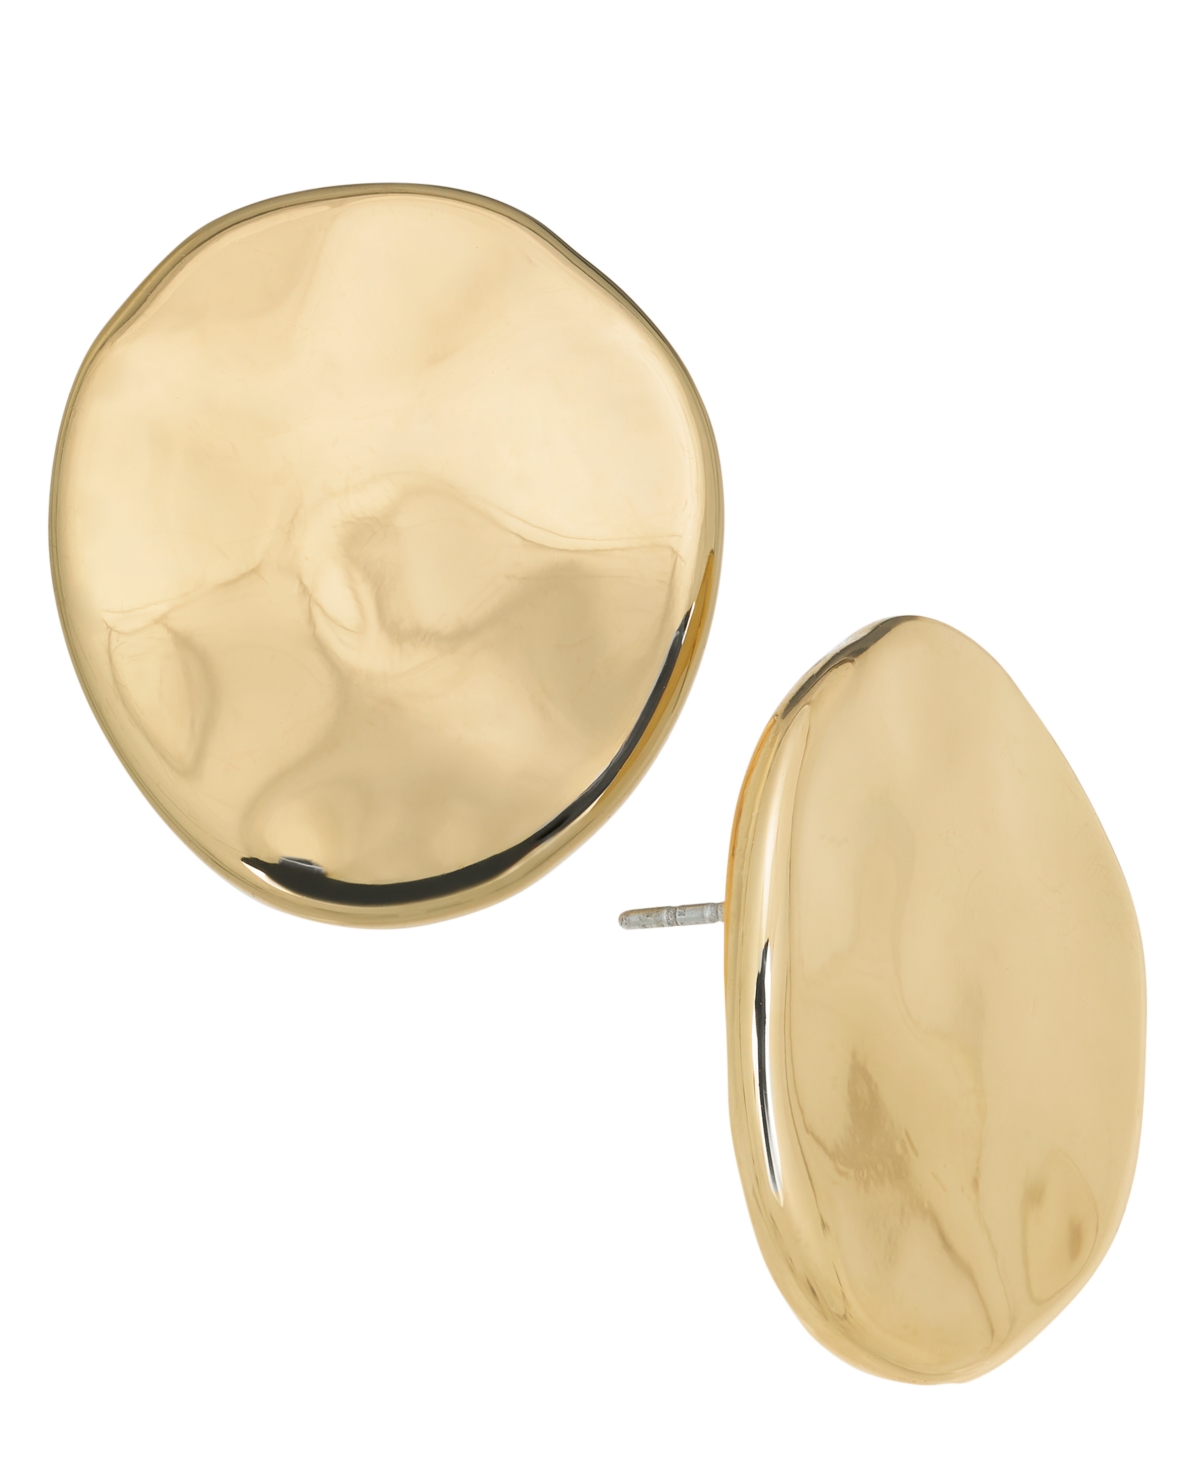 Hammered Circular Stud Earrings, Created for Macy's - Silver